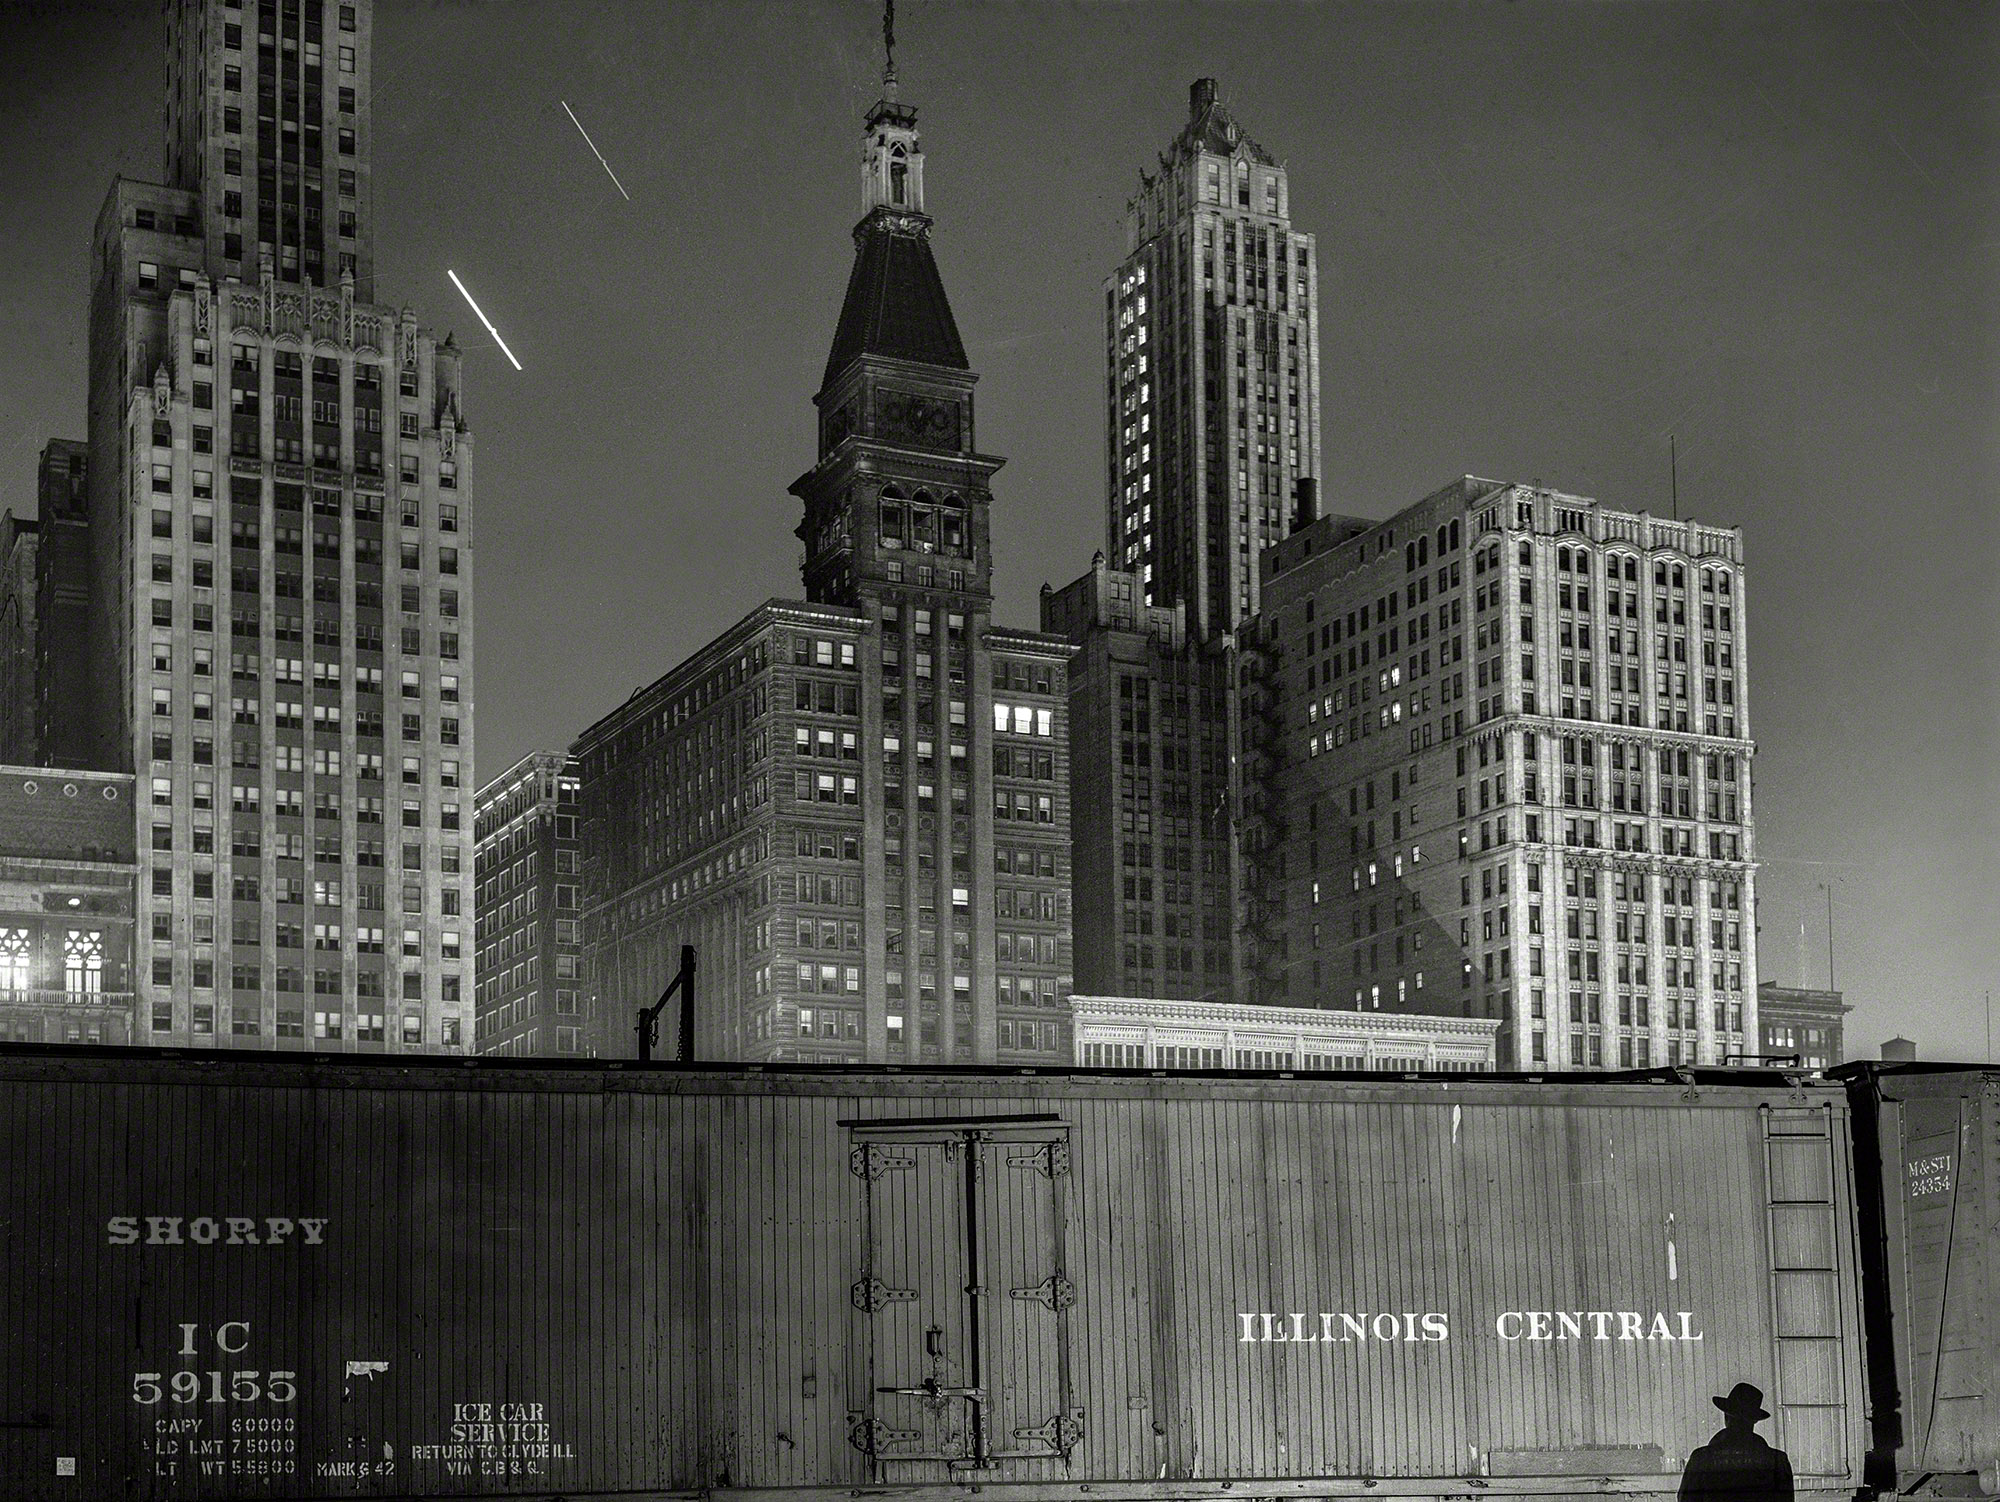 May 1943. Chicago. "Special agent making his rounds at night at the South Water Street freight terminal of the Illinois Central Railroad." Medium-format negative by Jack Delano for the Office of War Information. View full size.